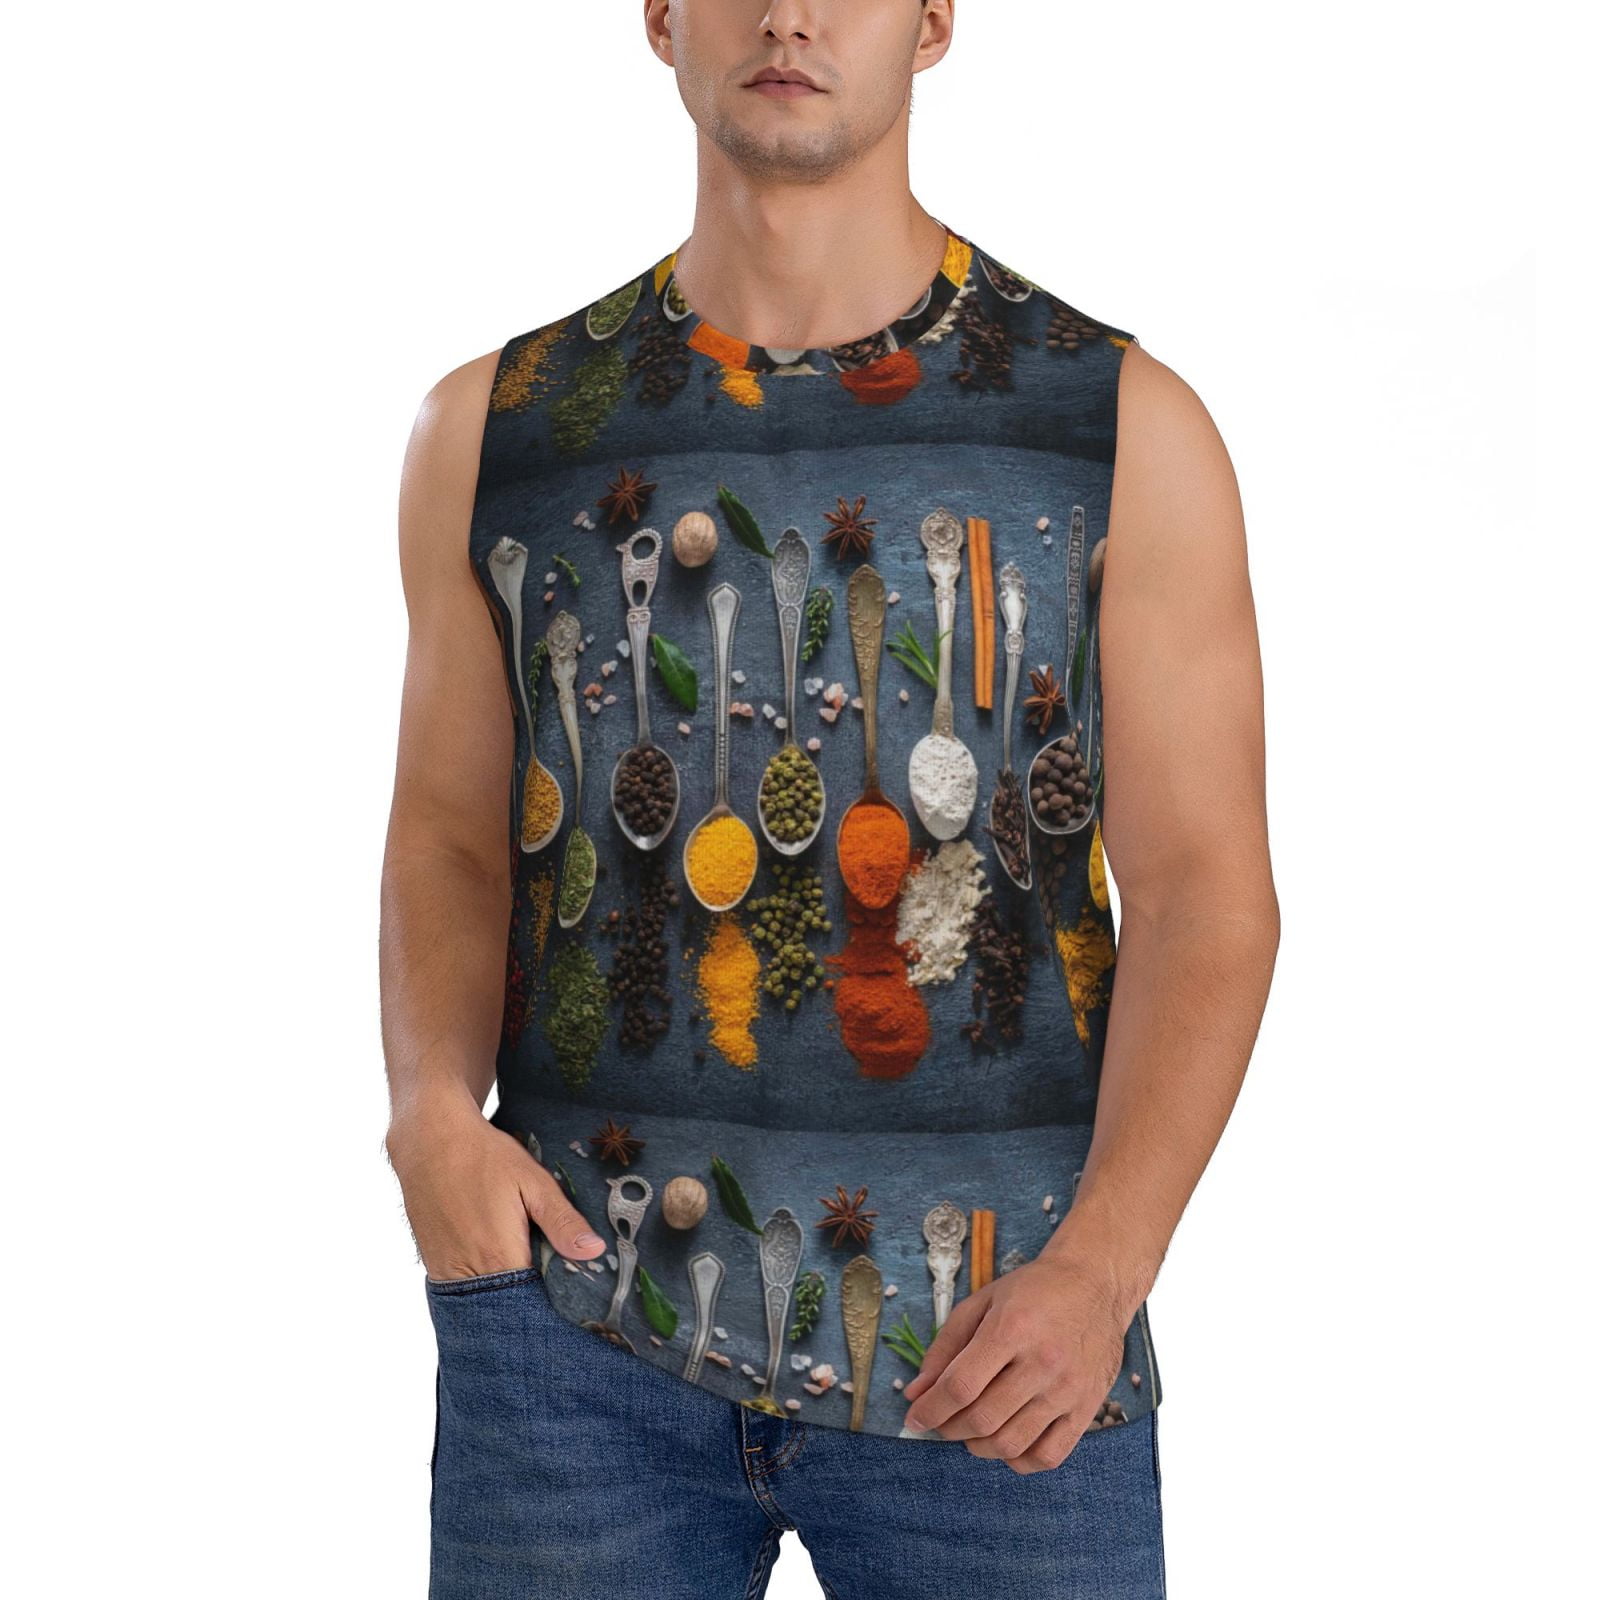 JUNZAN Various Herbs And Spices In Spoons Men's Sleeveless T Shirts ...